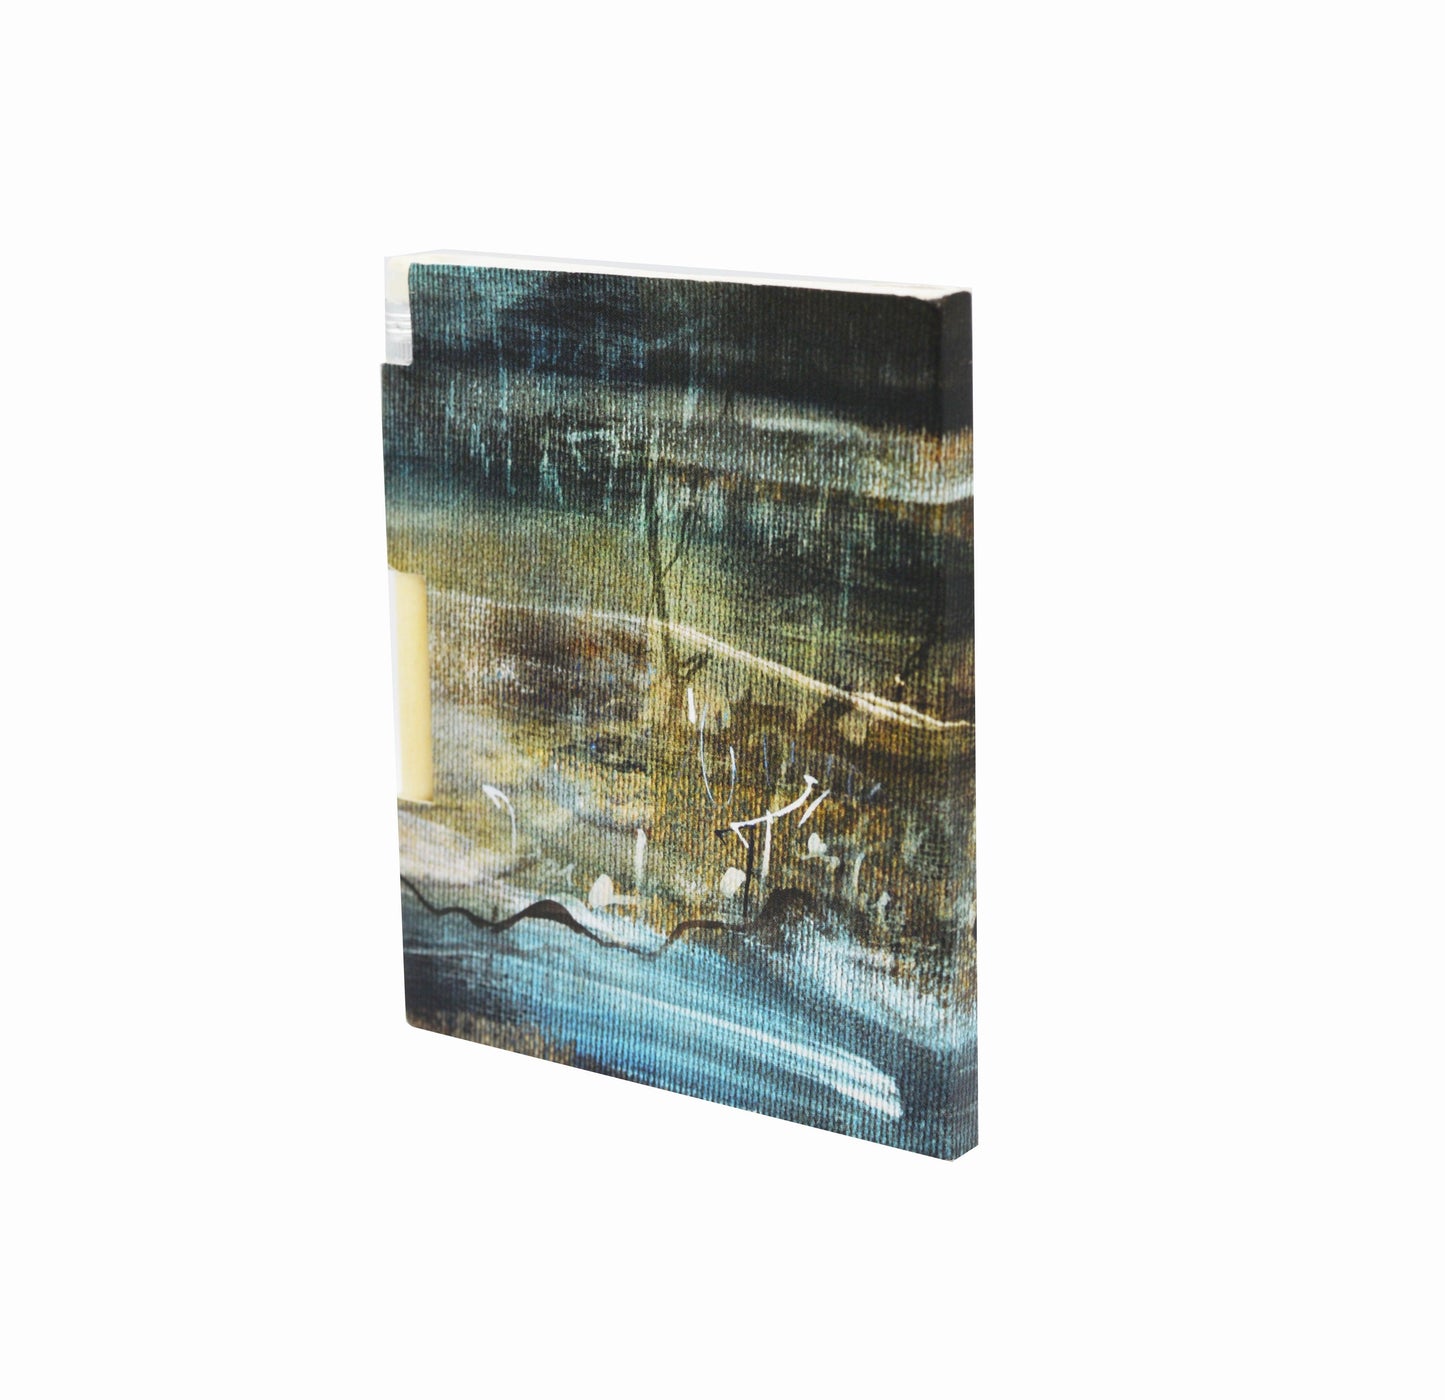 Pocket Notebook With Abstract Artwork, Magnetic Closure Eco Pencil